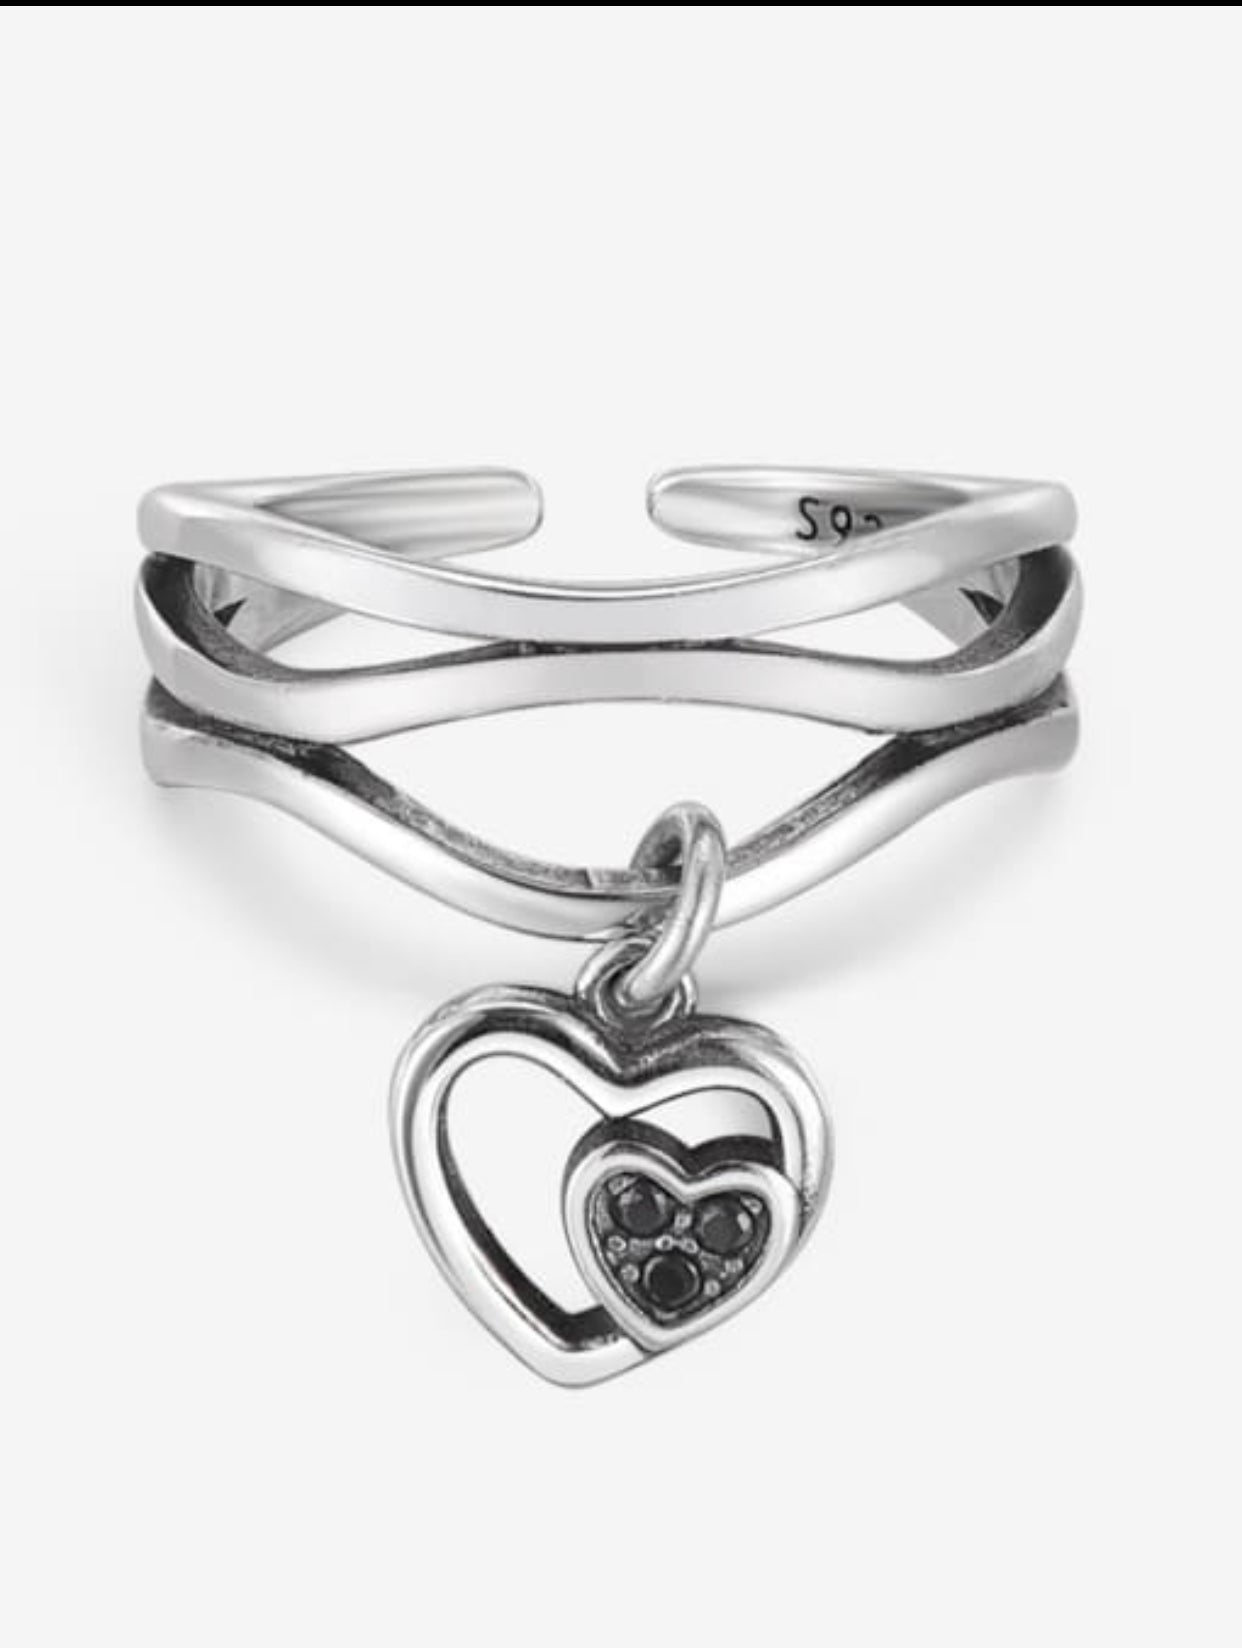 MIRABELLA DOUBLE HEART STERLING SILVER CHARM RING